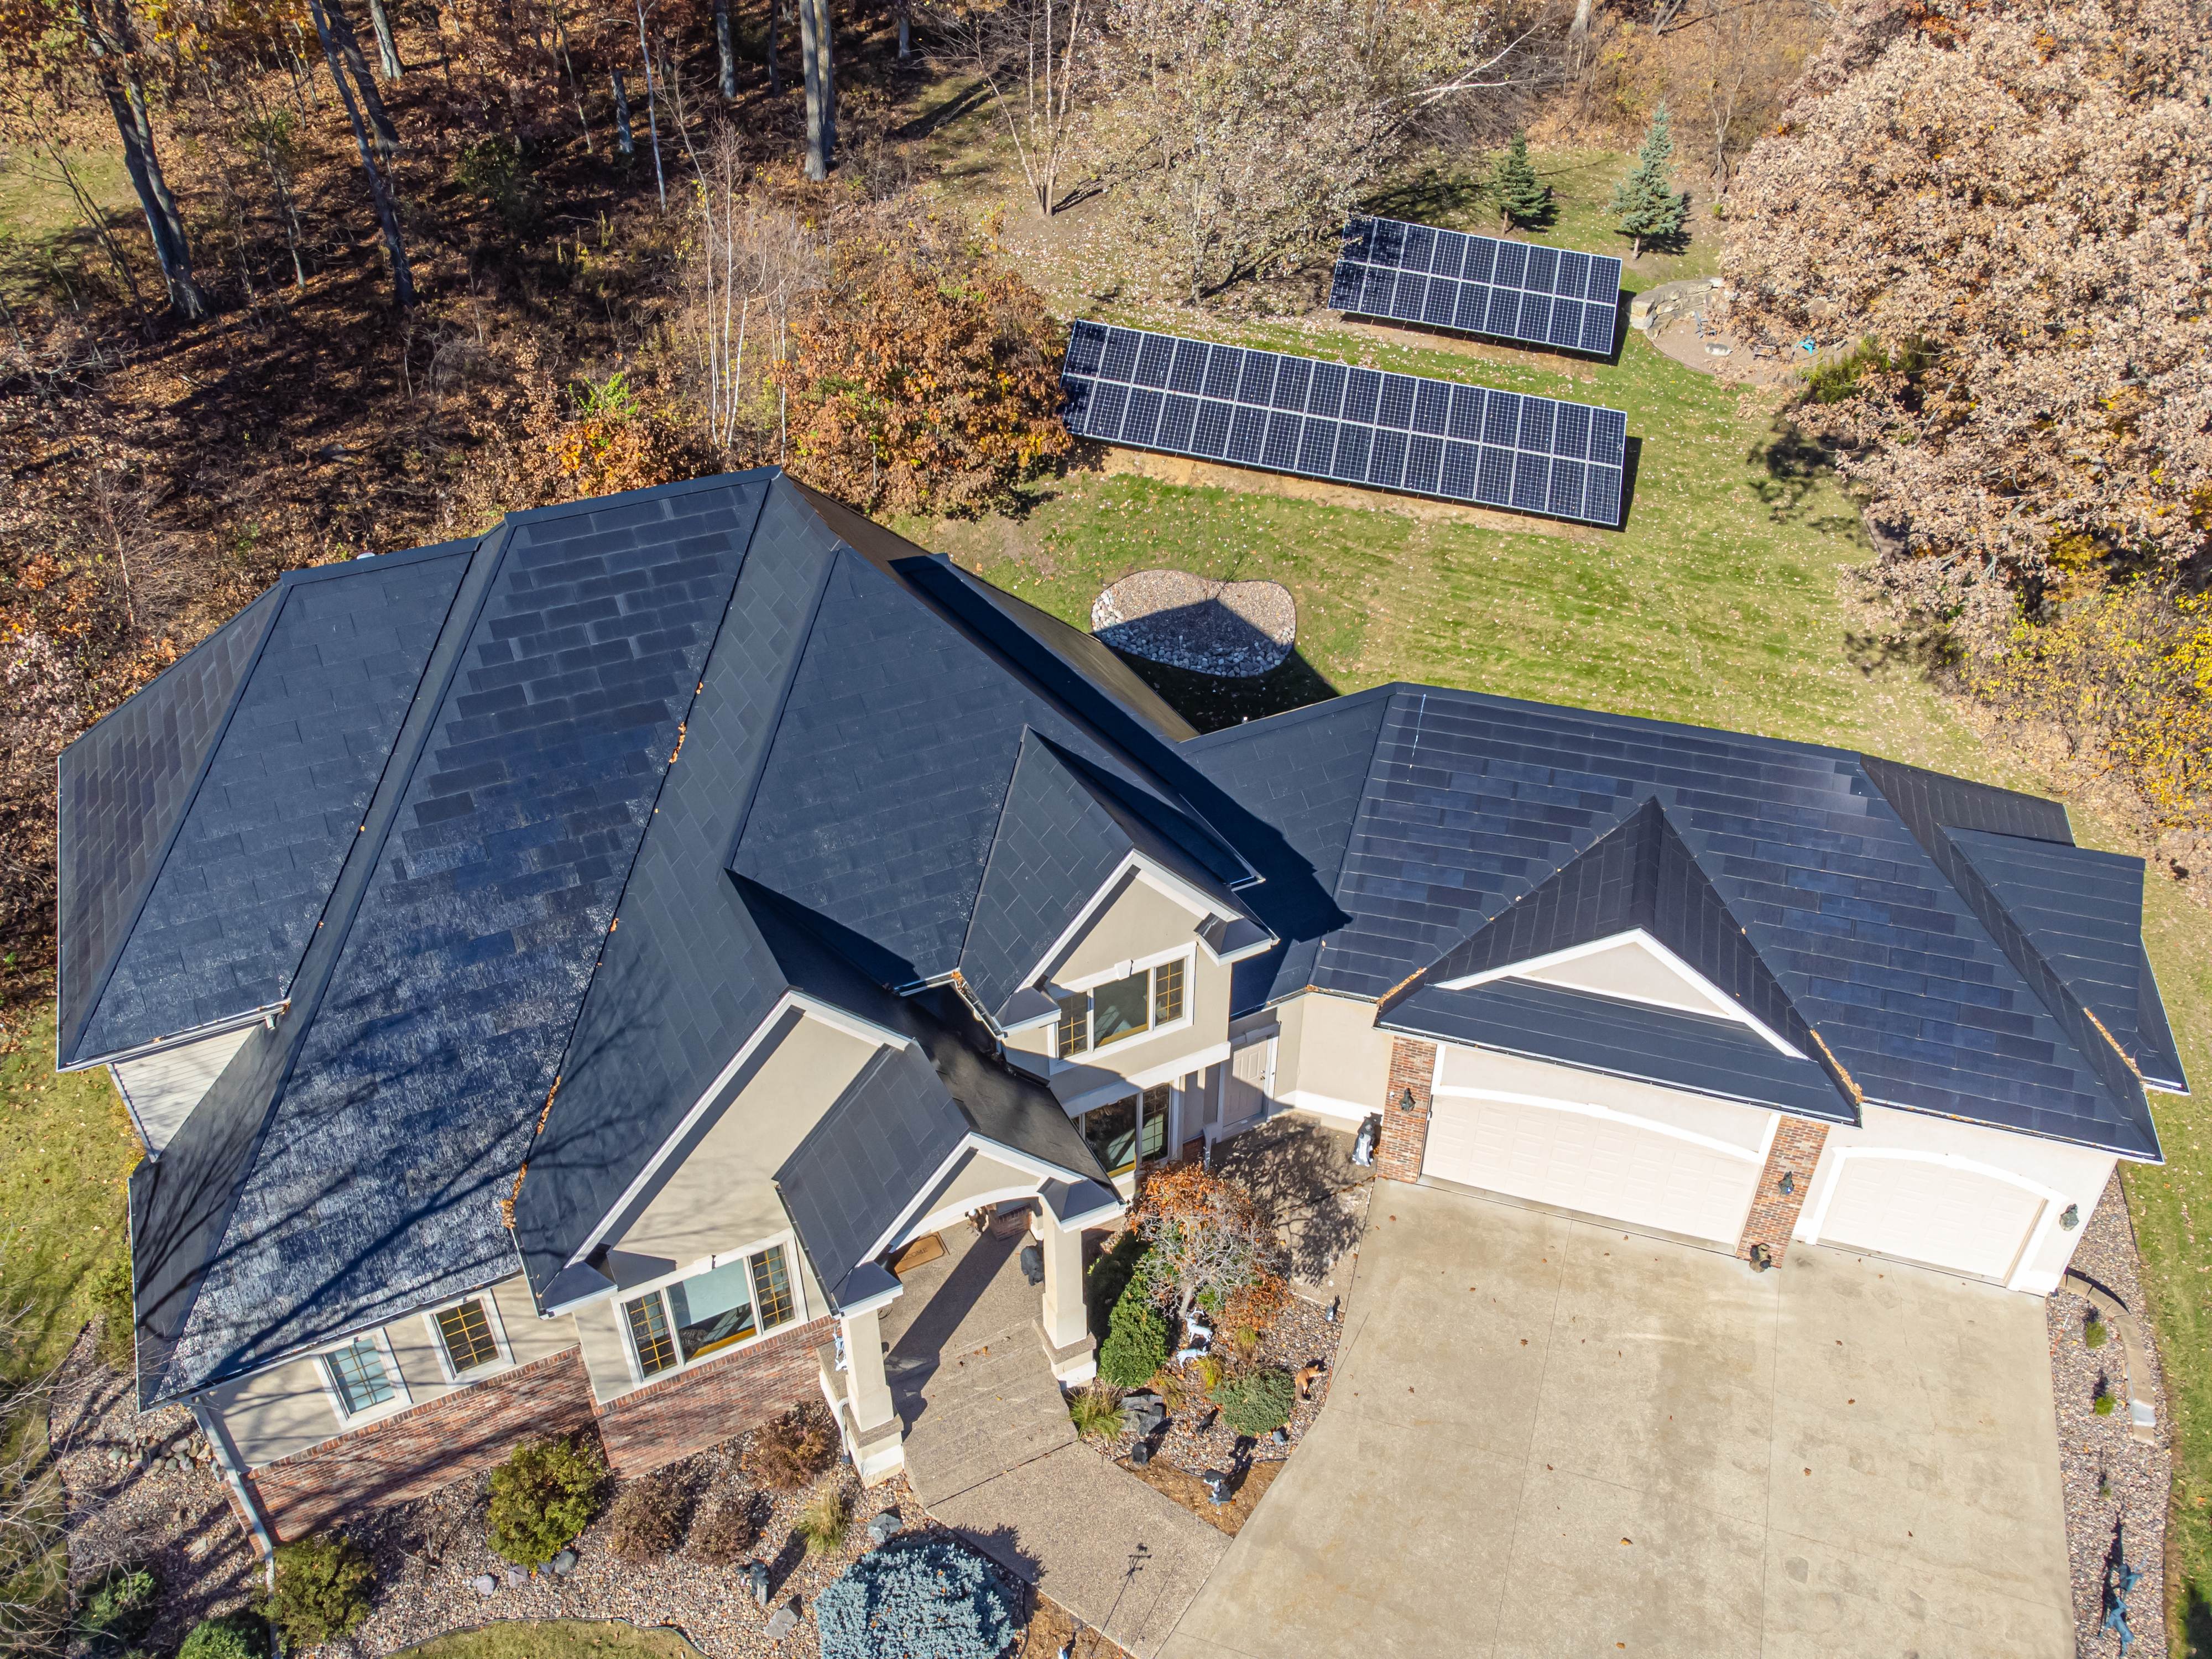 Tesla solar roof installer in Delaware, New Jersey, Pennsylvania, and Maryland. Contact us for more info about tesla roofing